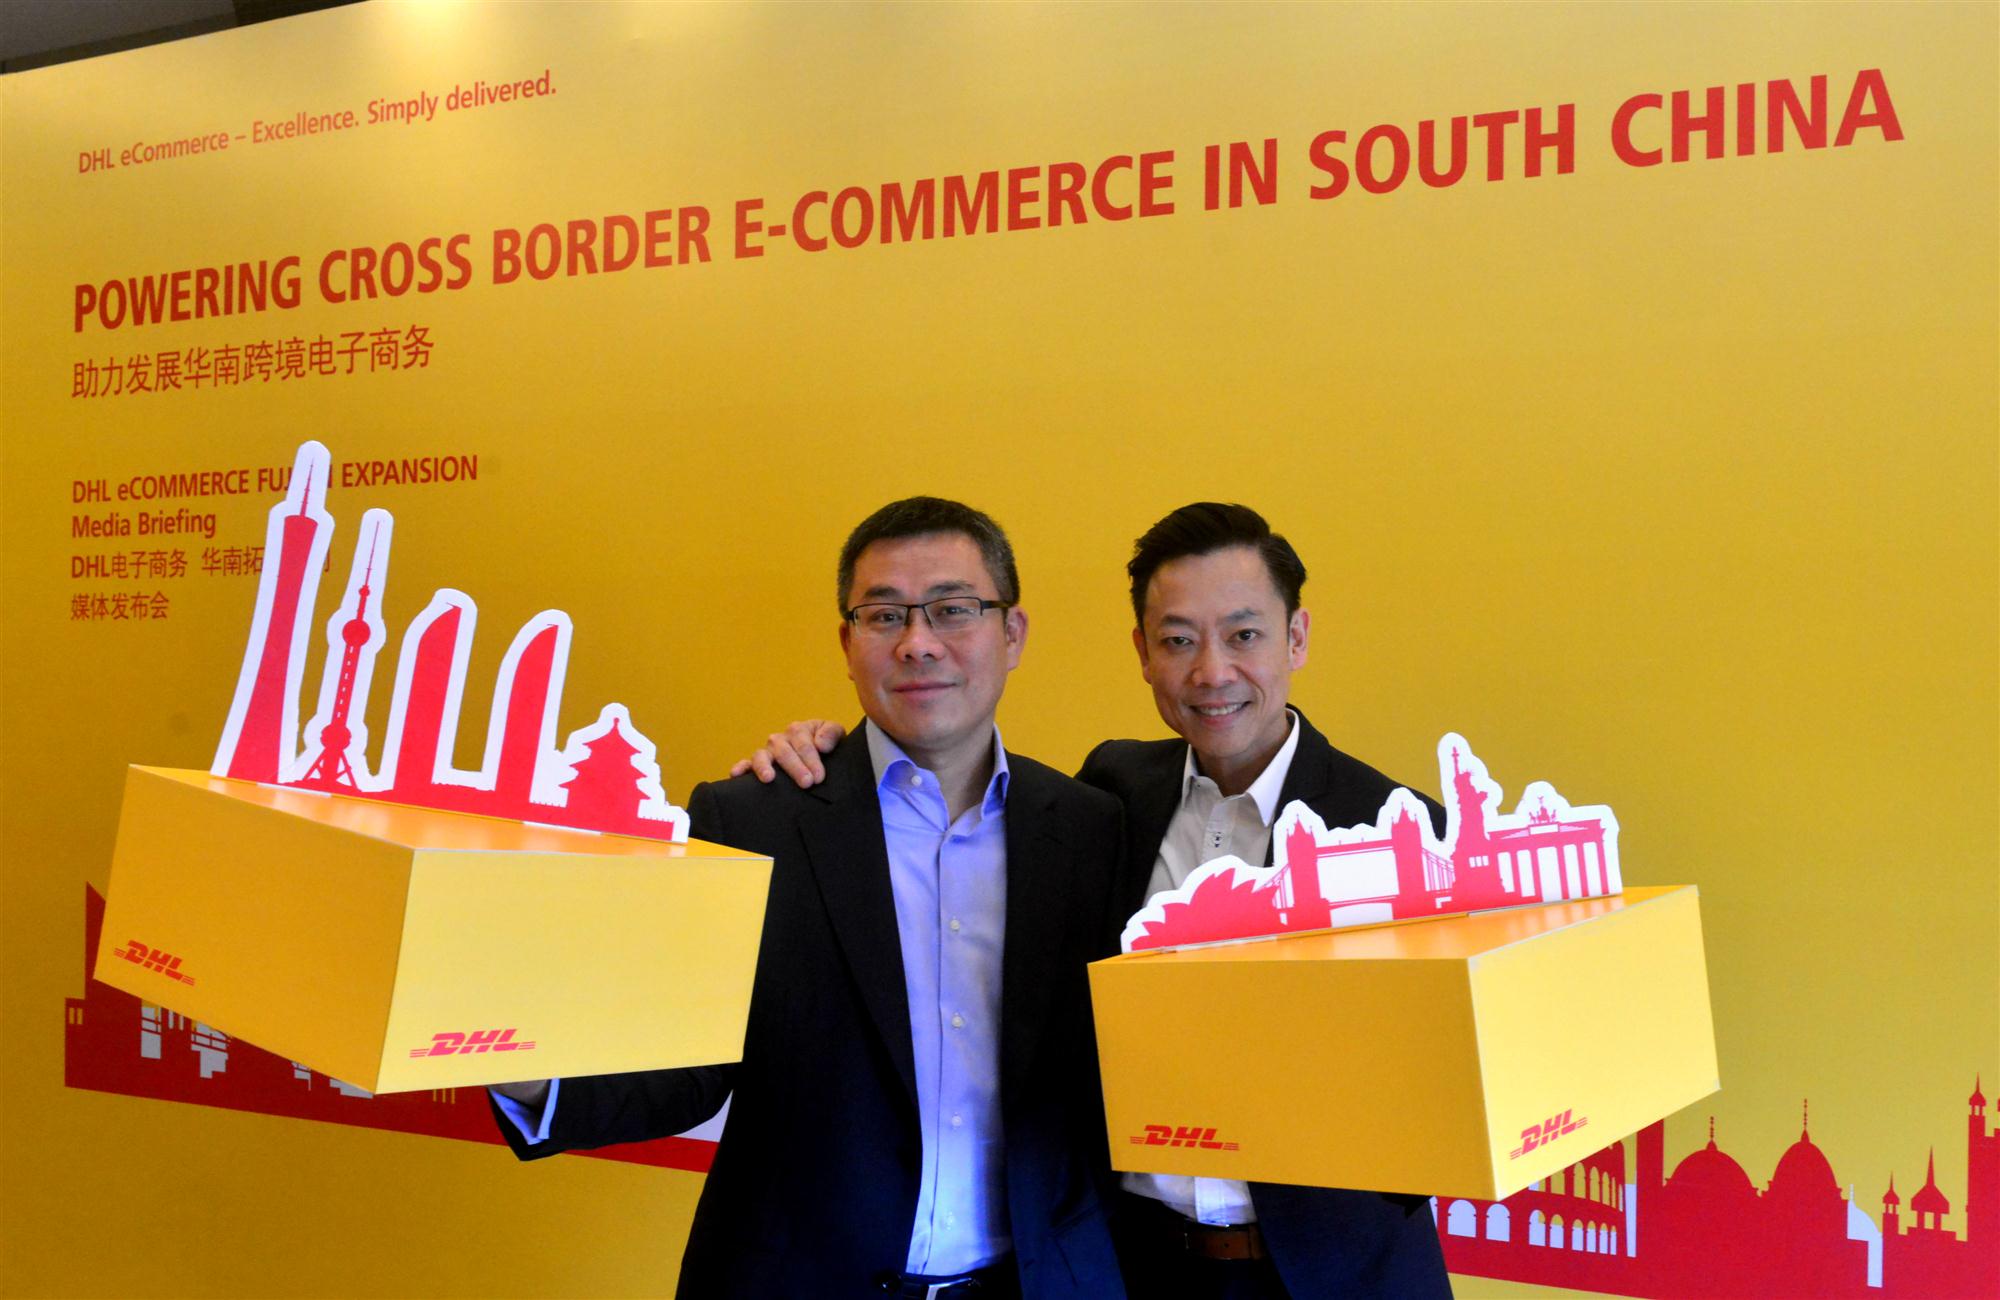 Self Photos / Files - DHL eCommerce South China